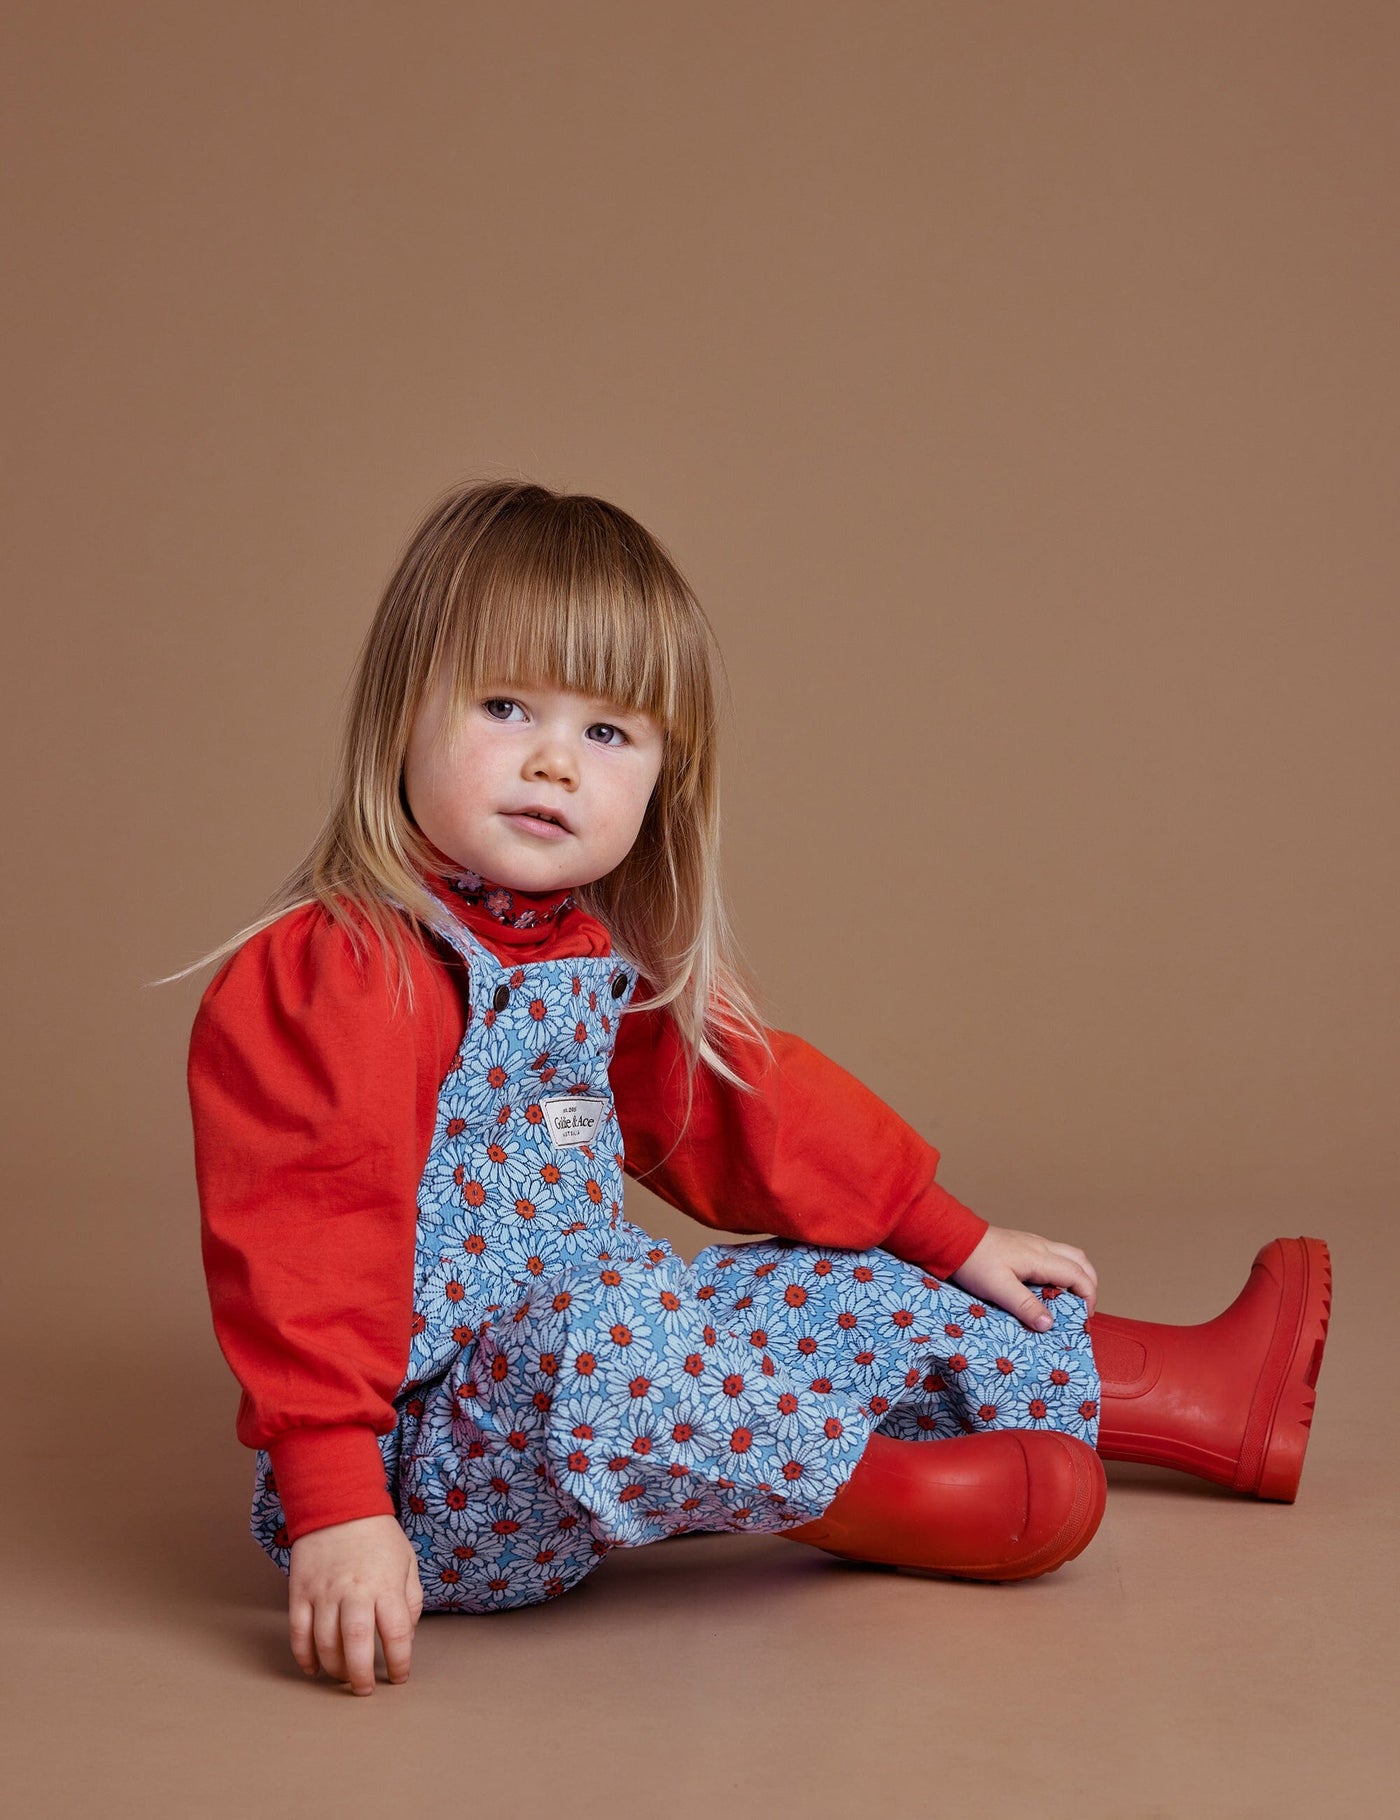 Goldie & Ace Goldie Vintage Overall Dixie Daisy Corduroy - Blue Red Overalls Goldie & Ace 